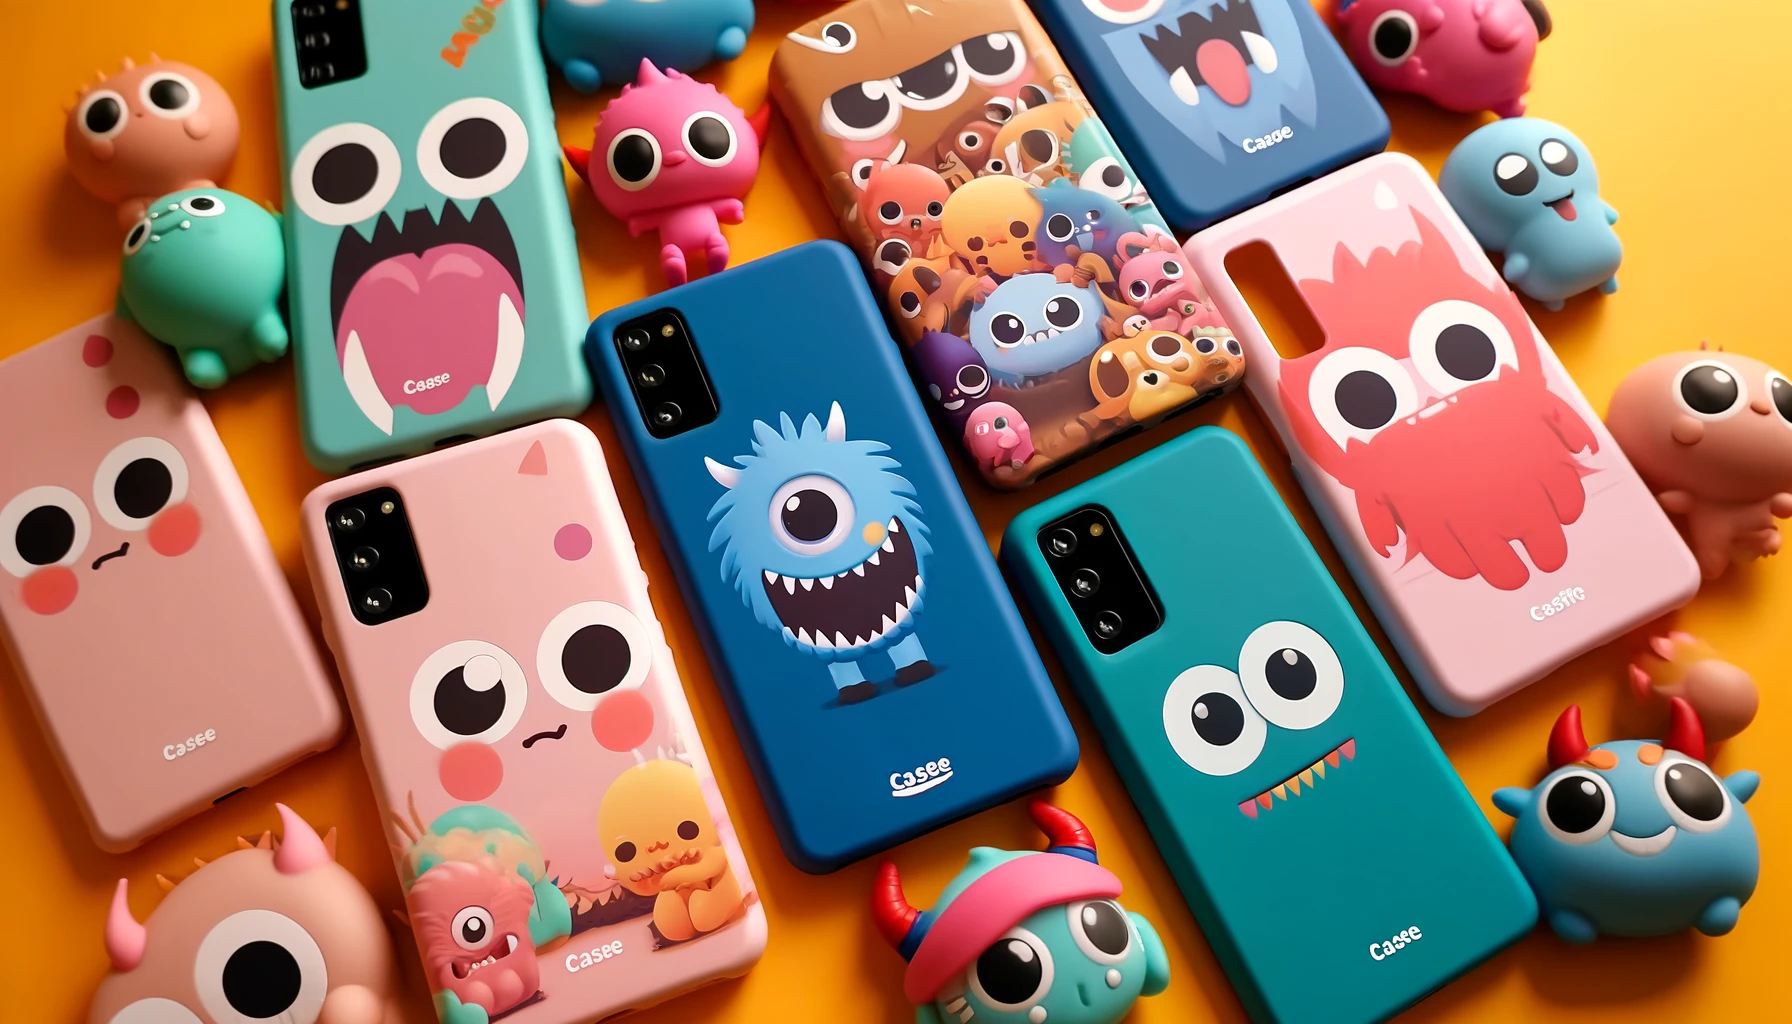 A vibrant and attractive image showcasing a collection of CASETiFY smartphone cases featuring small monster anime characters. The design should highlight the unique charm and colorful, playful nature of these characters. The word 'CASE' should be prominently displayed on the image.